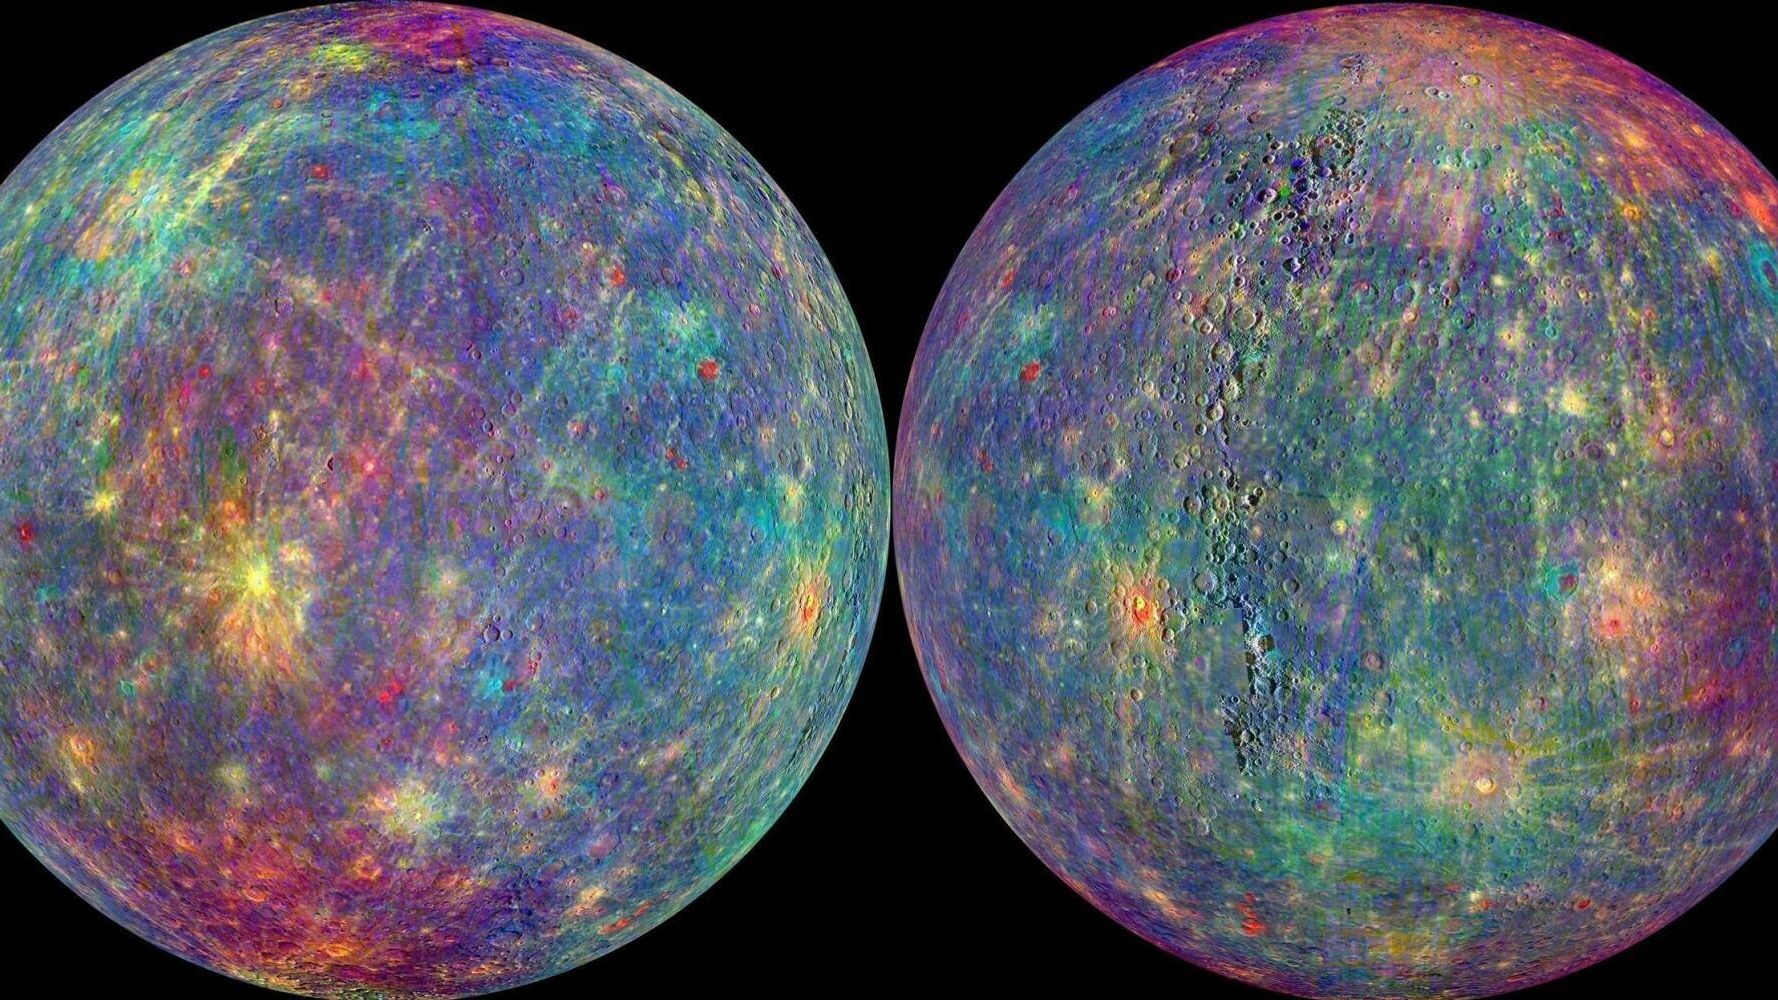 the planet mercury in color